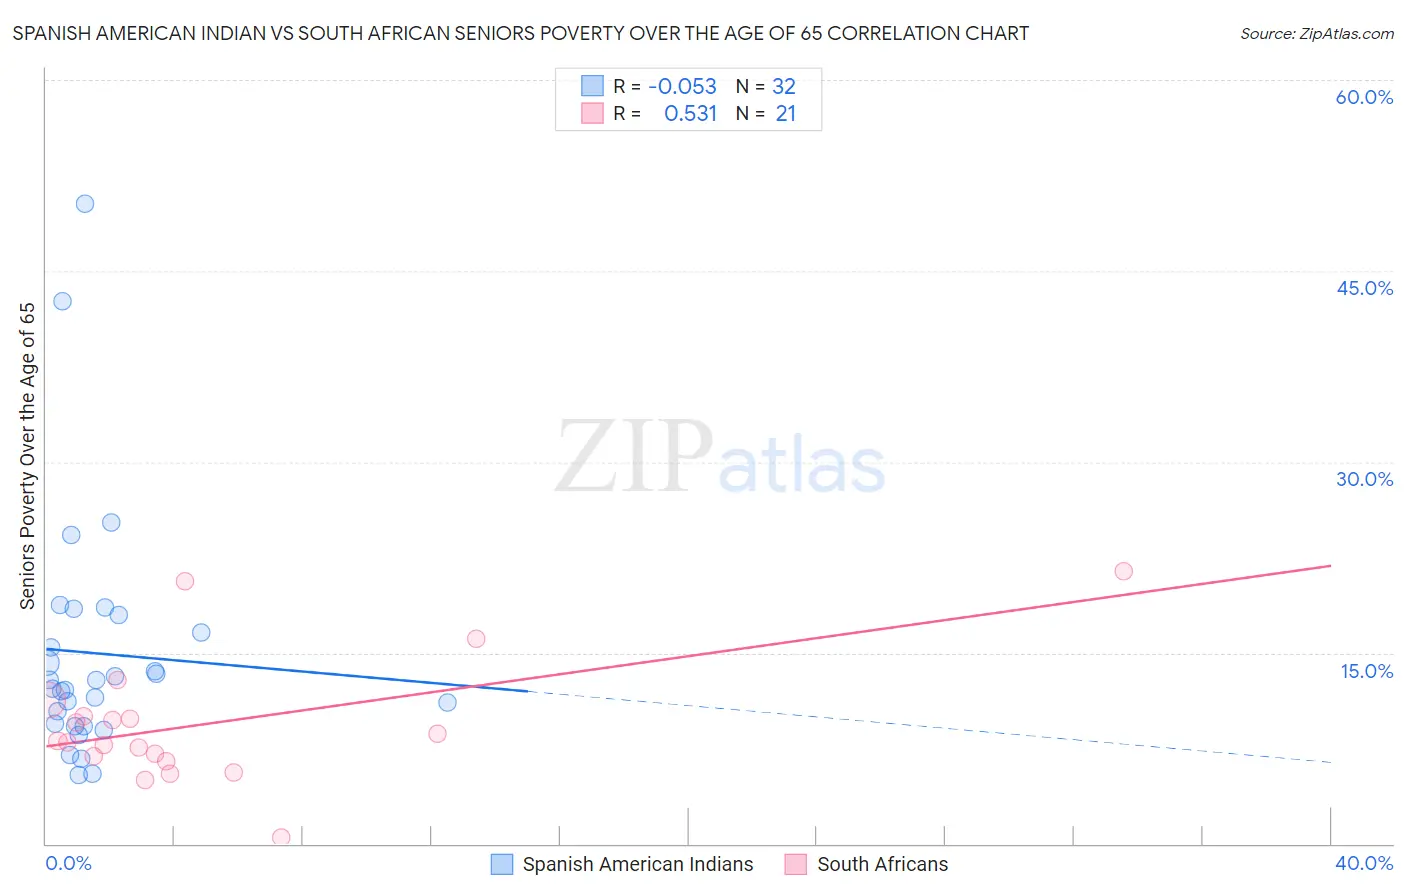 Spanish American Indian vs South African Seniors Poverty Over the Age of 65